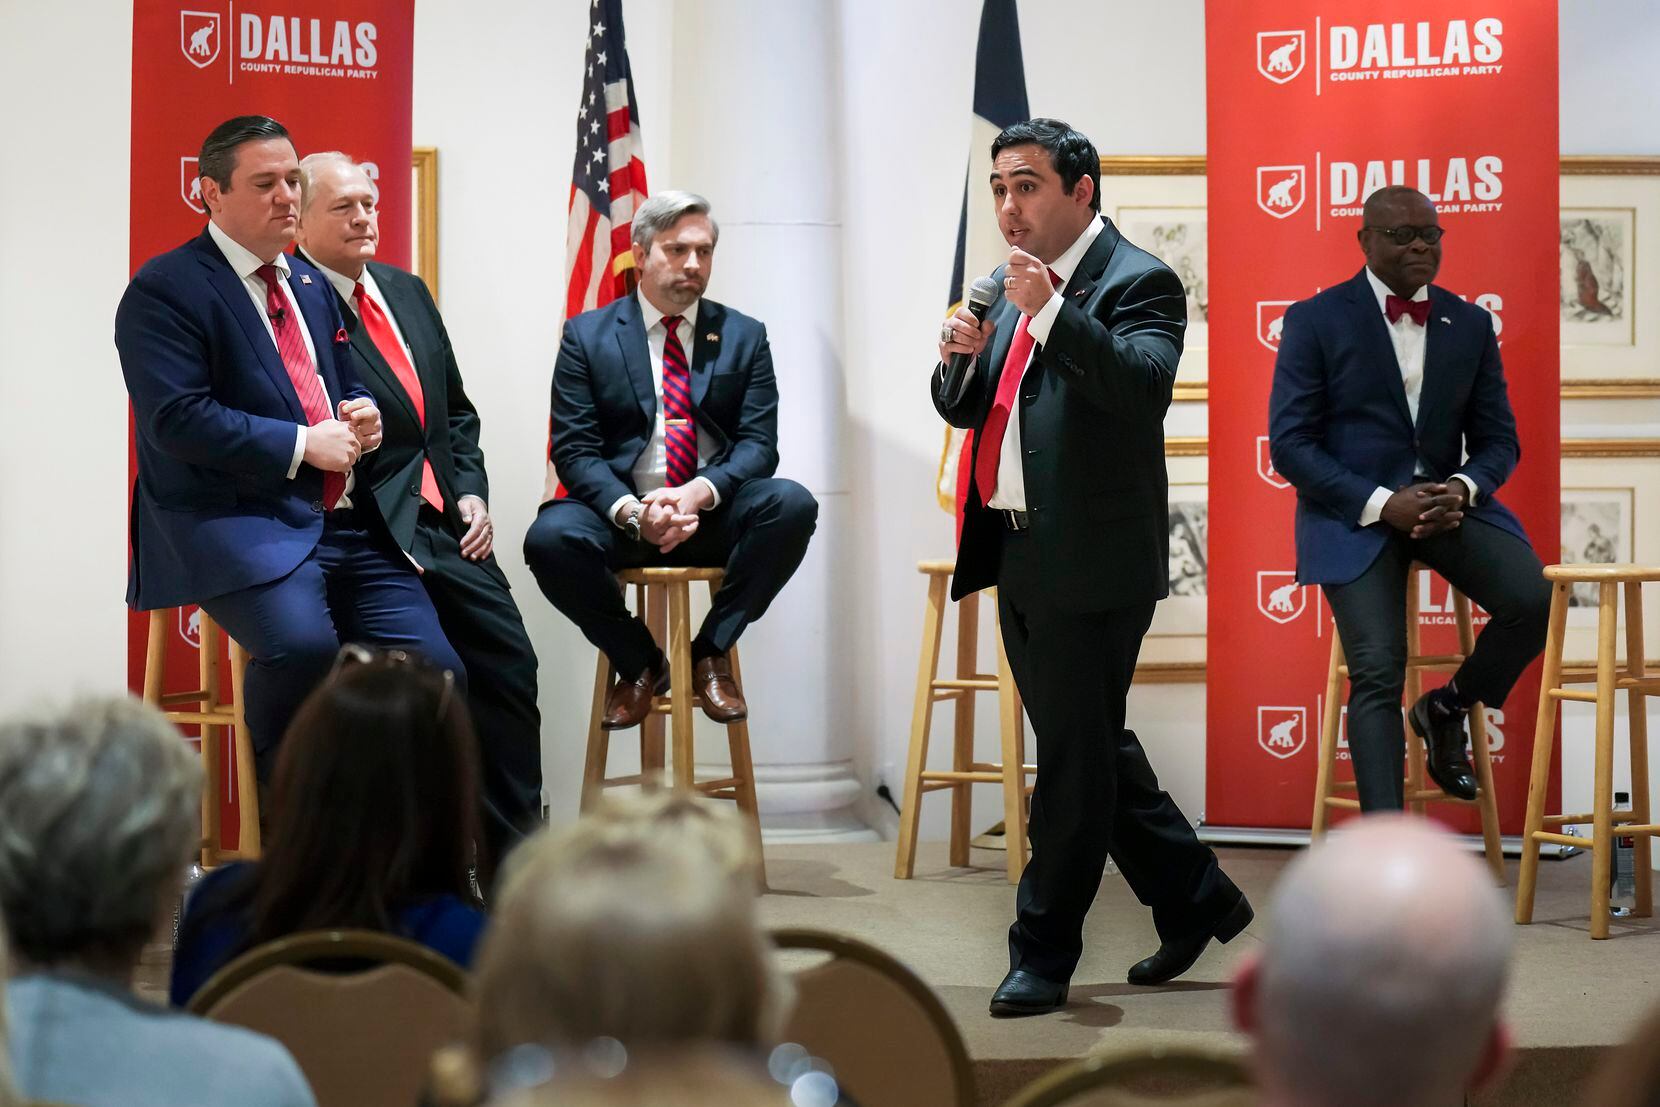 Brad Namdar answers a question during a forum for Republican candidates running for U.S. representative in the 32nd Congressional District of Texas at the Museum of Biblical Art on Feb. 9, 2022. Seated behind Namdar are (from left) Nathan Davis, Darrell Day, Justin Webb and Edward Okpa. Antonio Swad, another candidate, is not pictured.